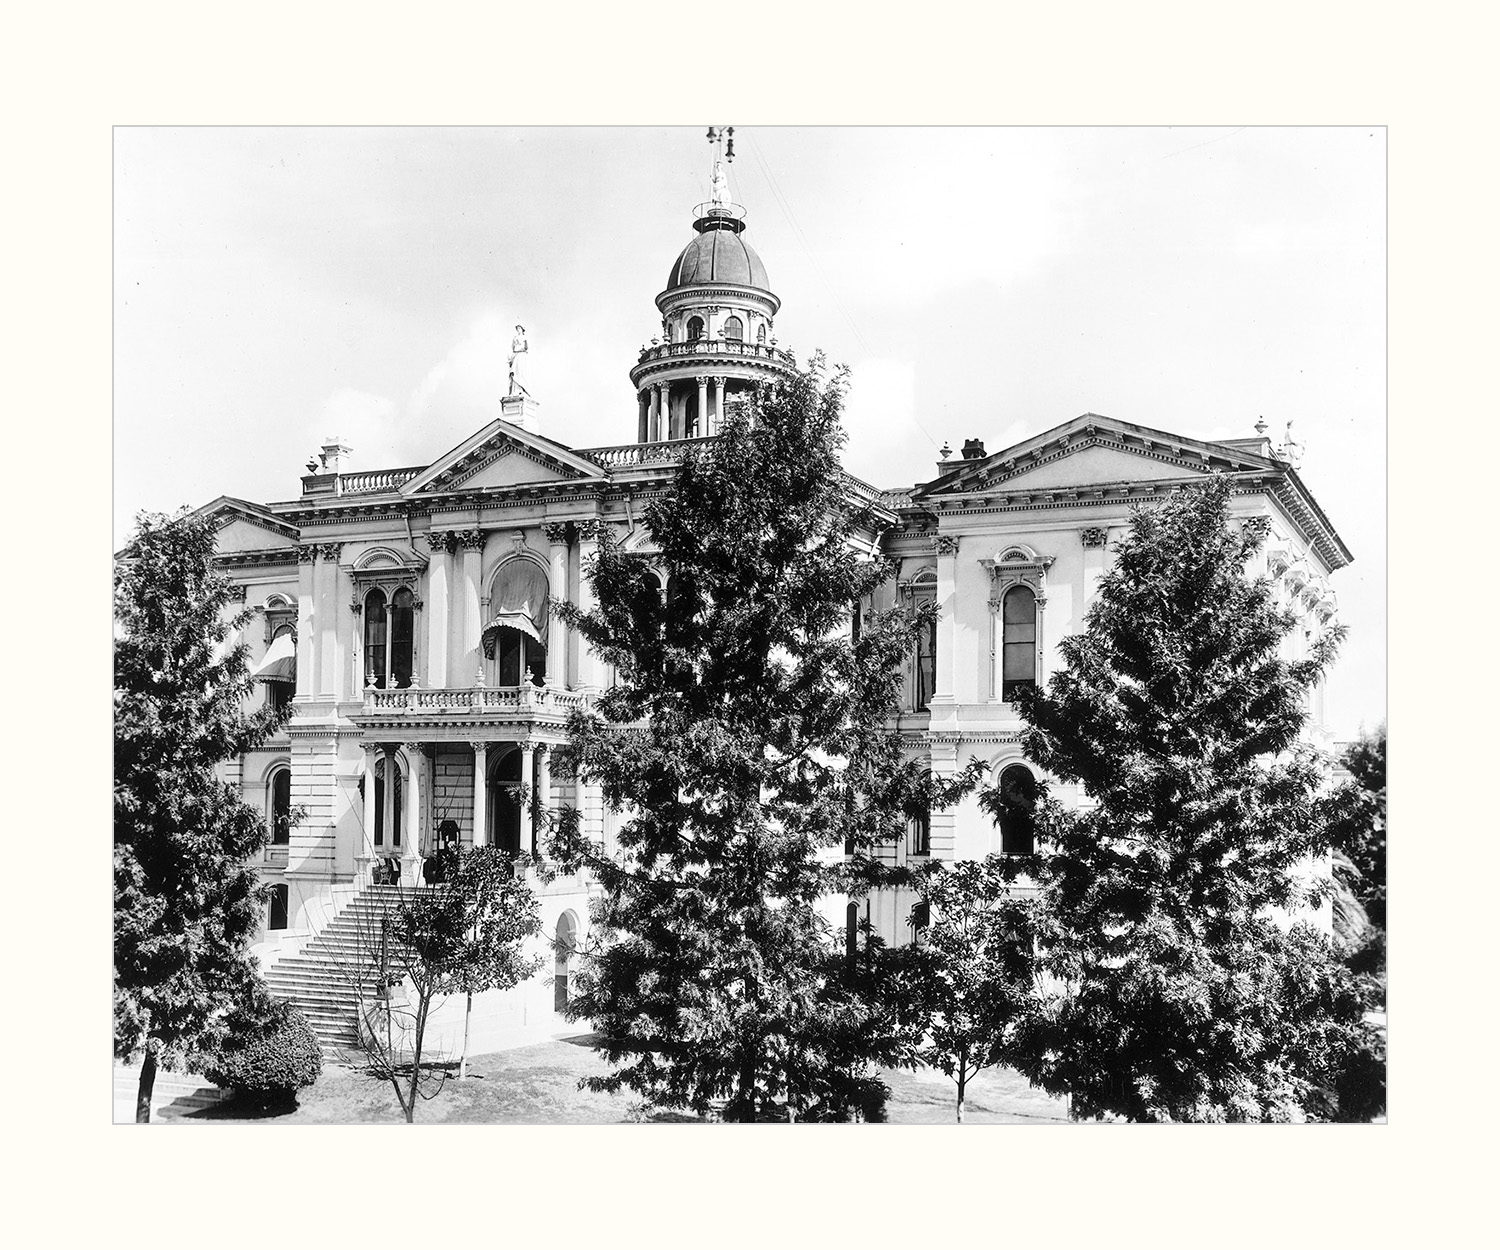 California County Courthouses: Tulare